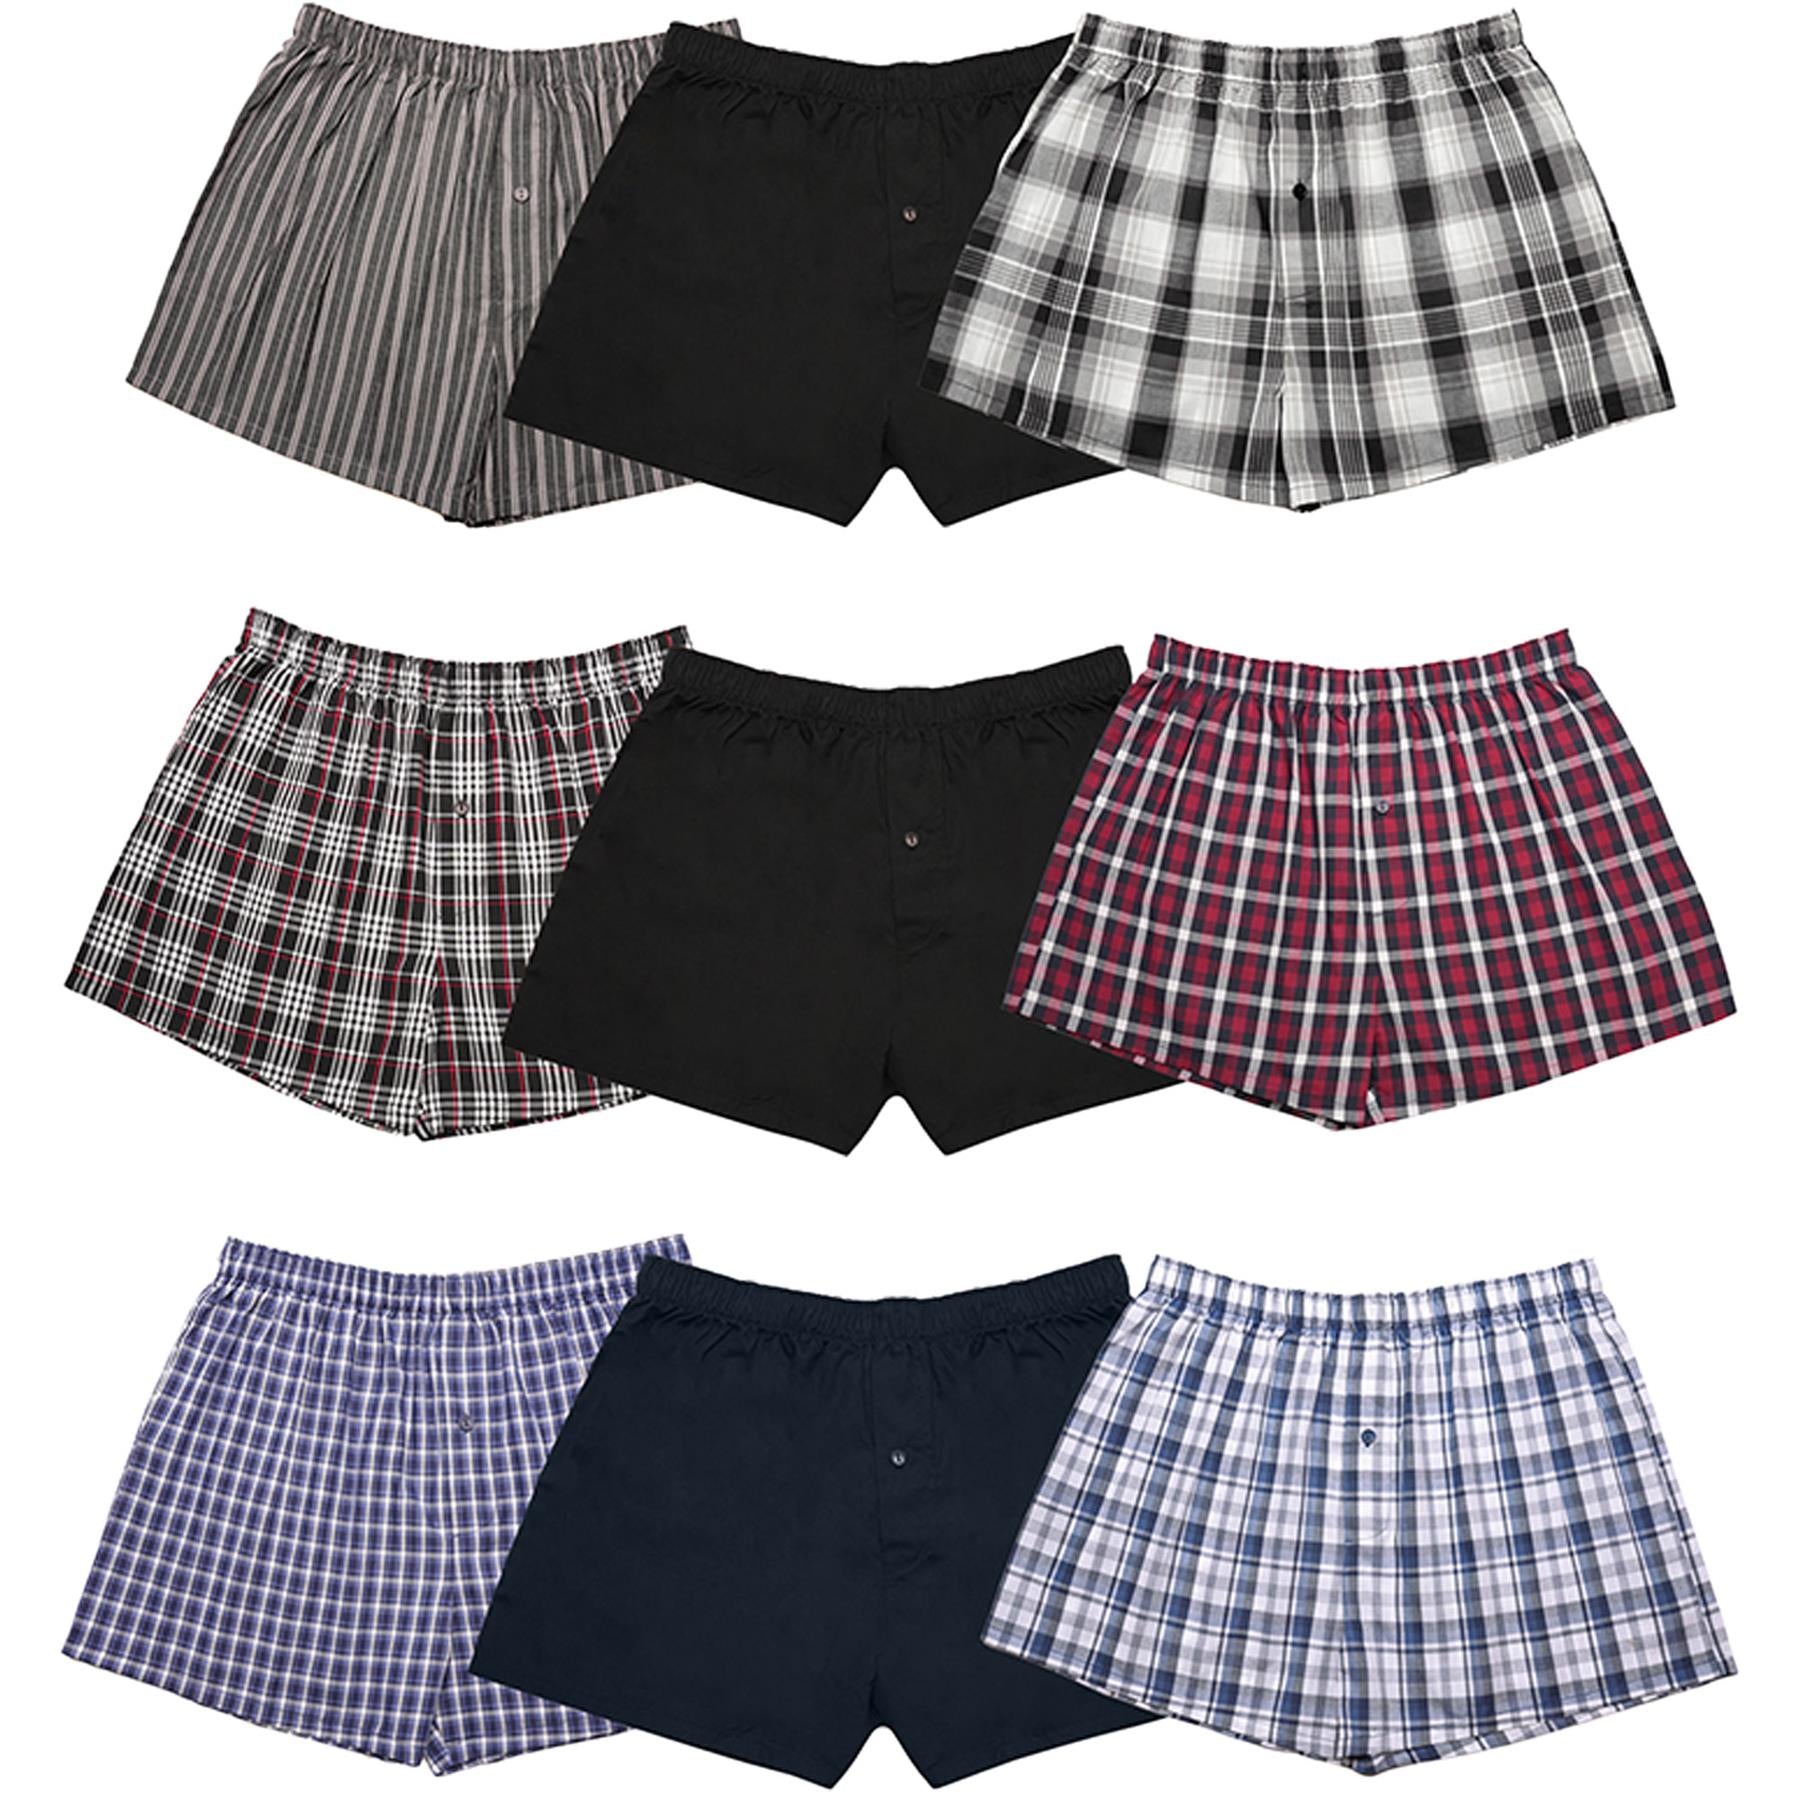 Mens Check Woven Boxer Shorts Underwear Pack Of 3 Knickers Elasticated Waistband